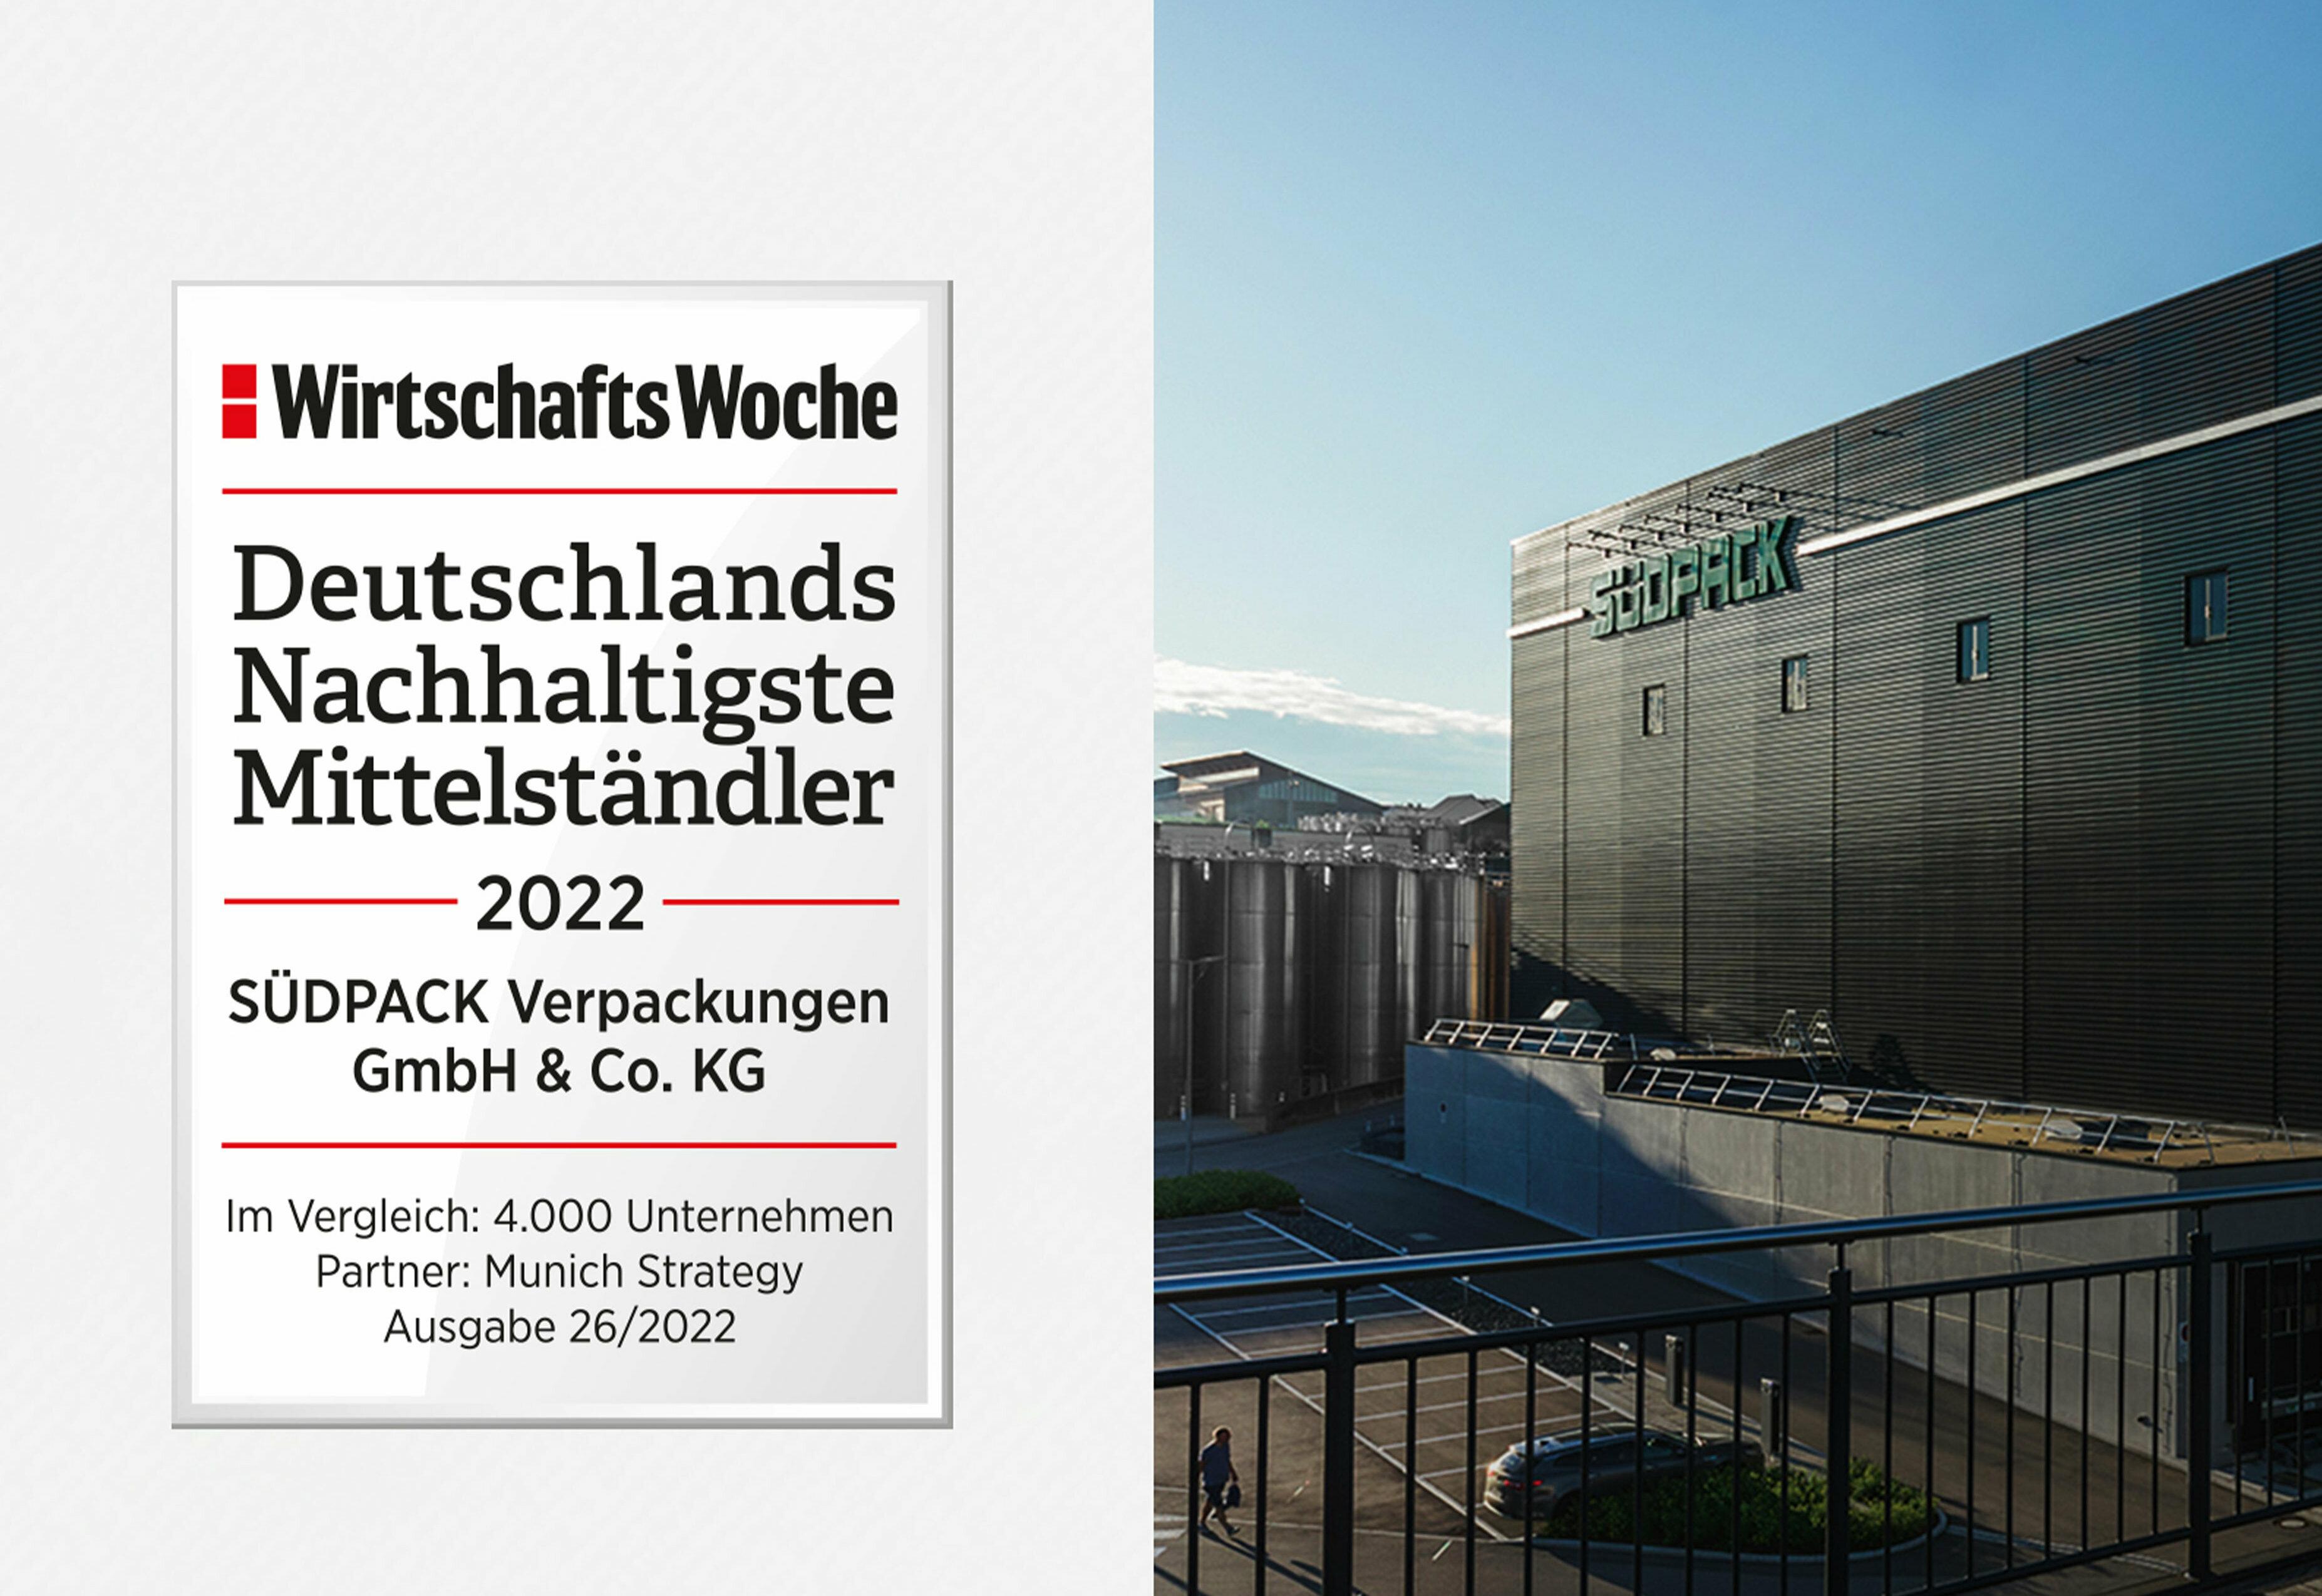 SÜDPACK is one of the top 50 most sustainable medium-sized companies in Germany